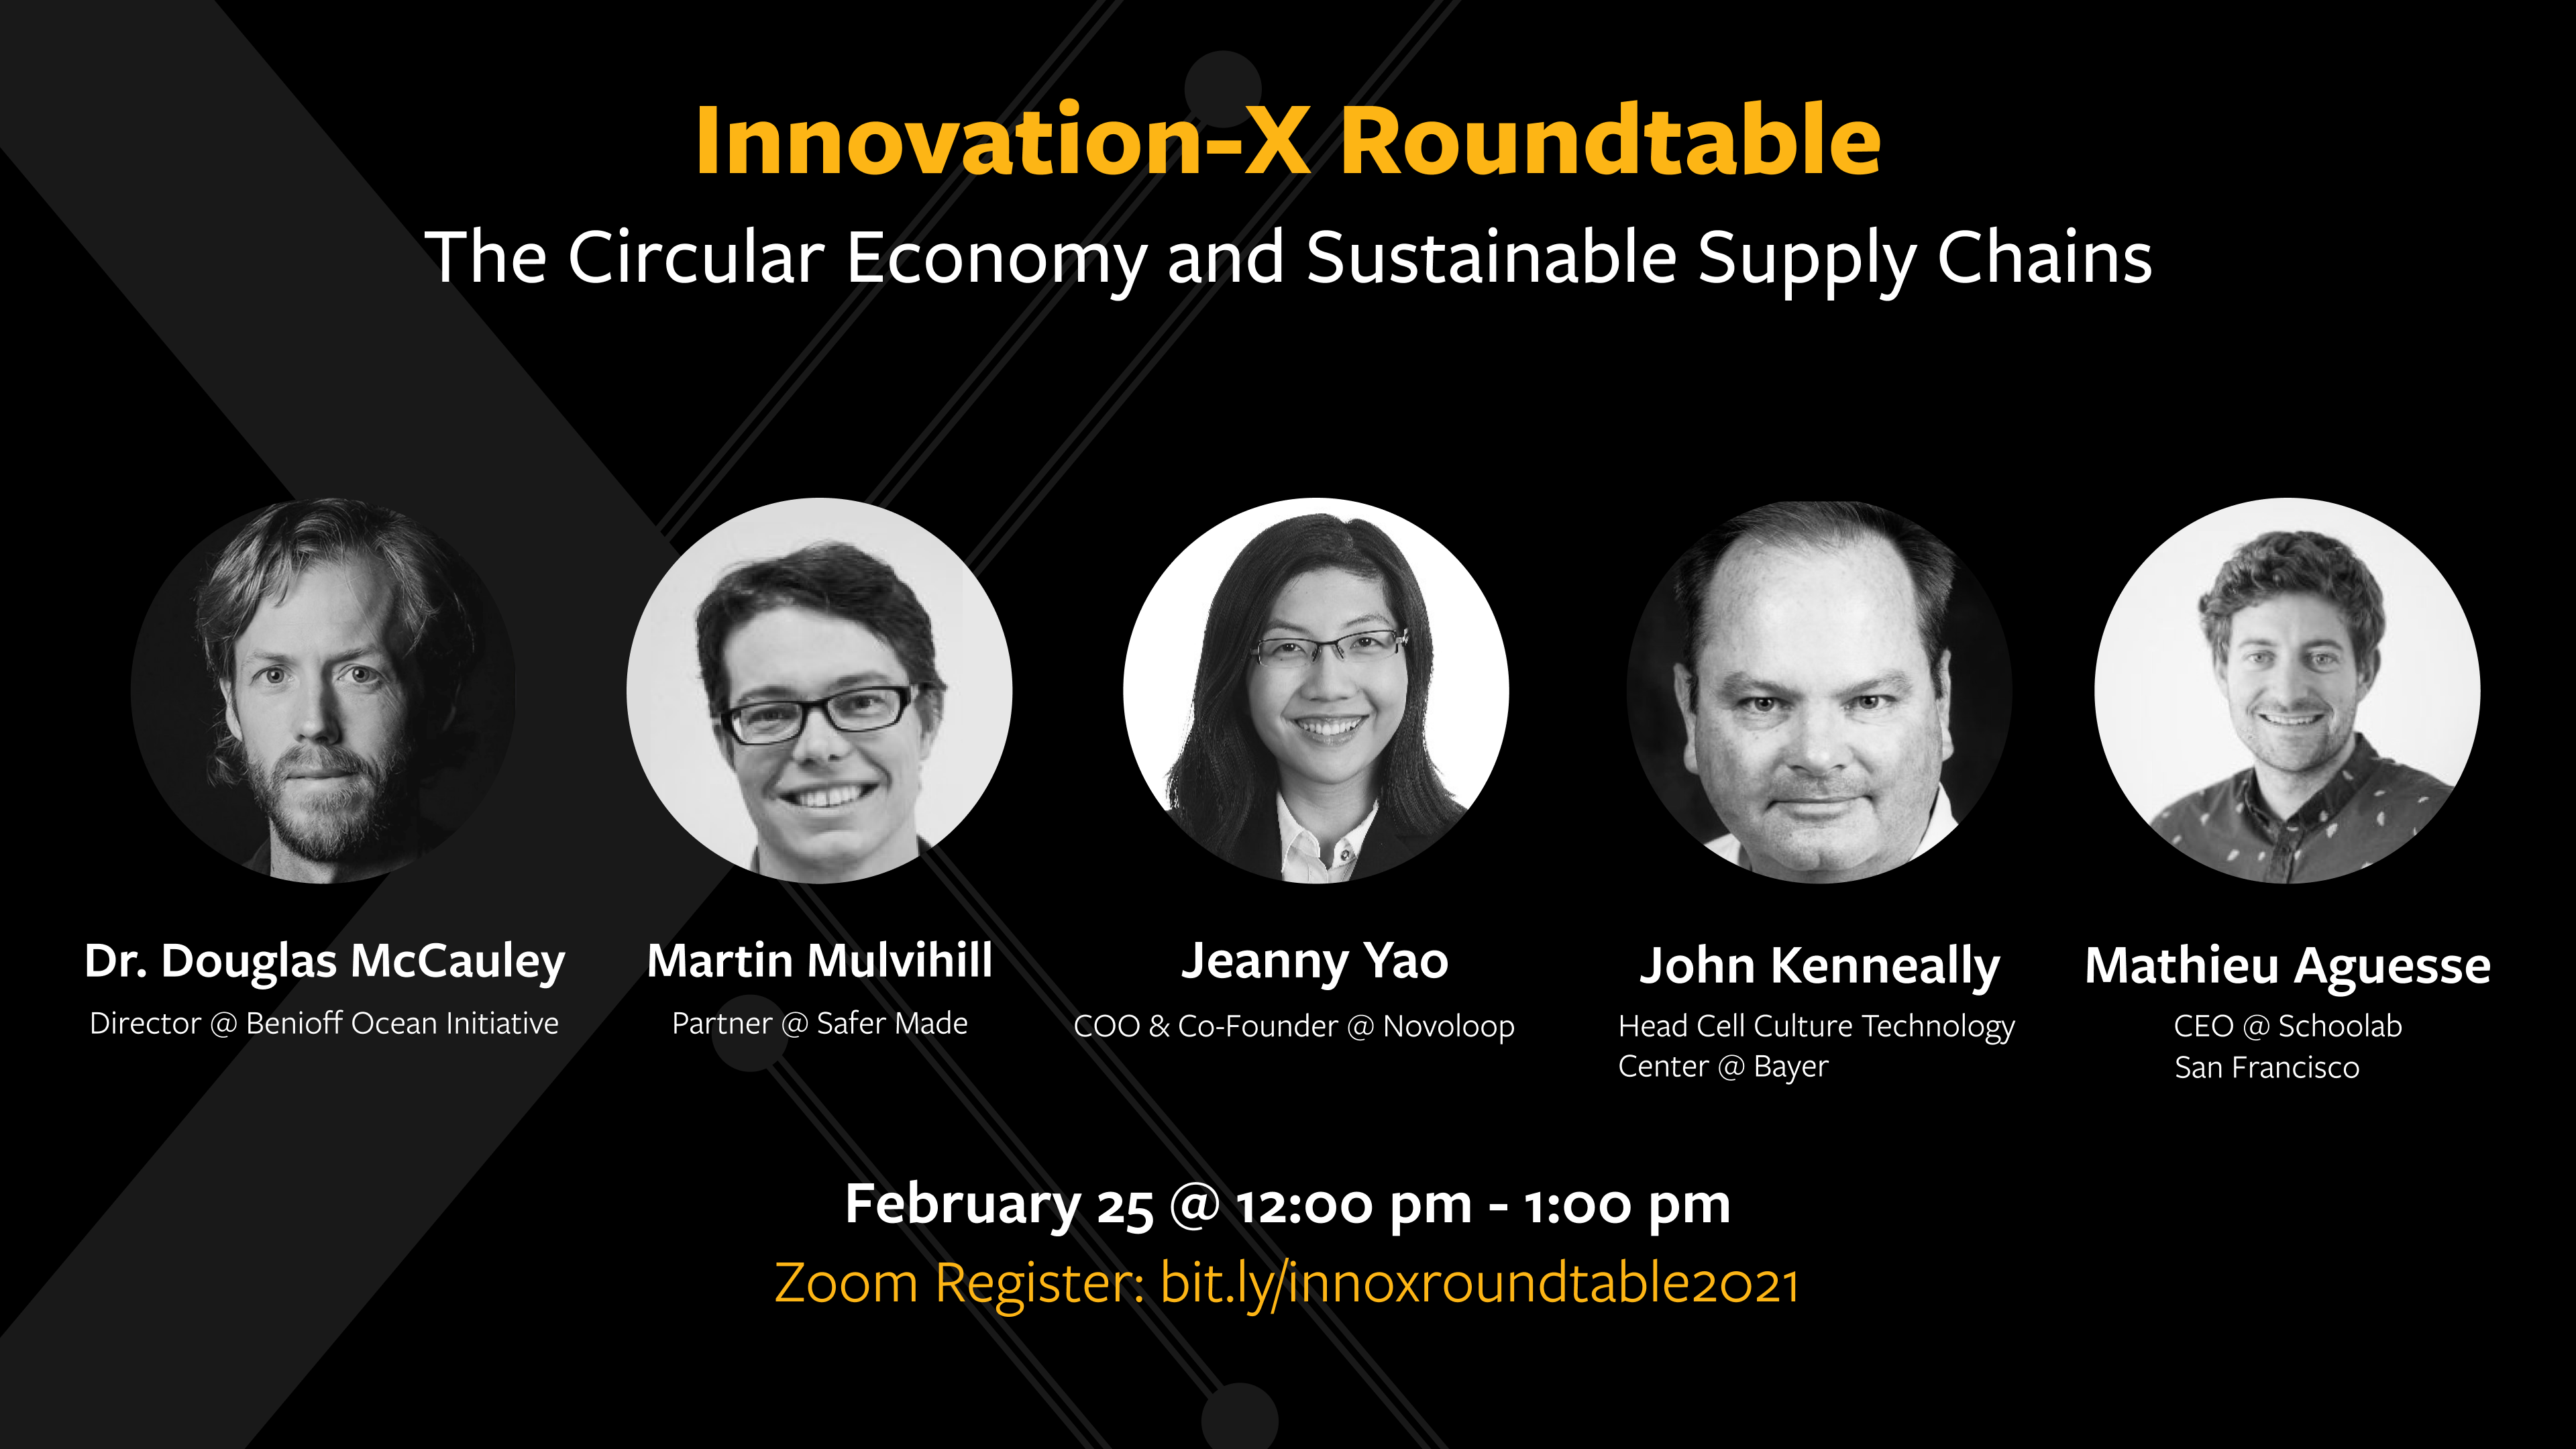 Innovation X Roundtable Circular Economy Sustainable Supply Chains